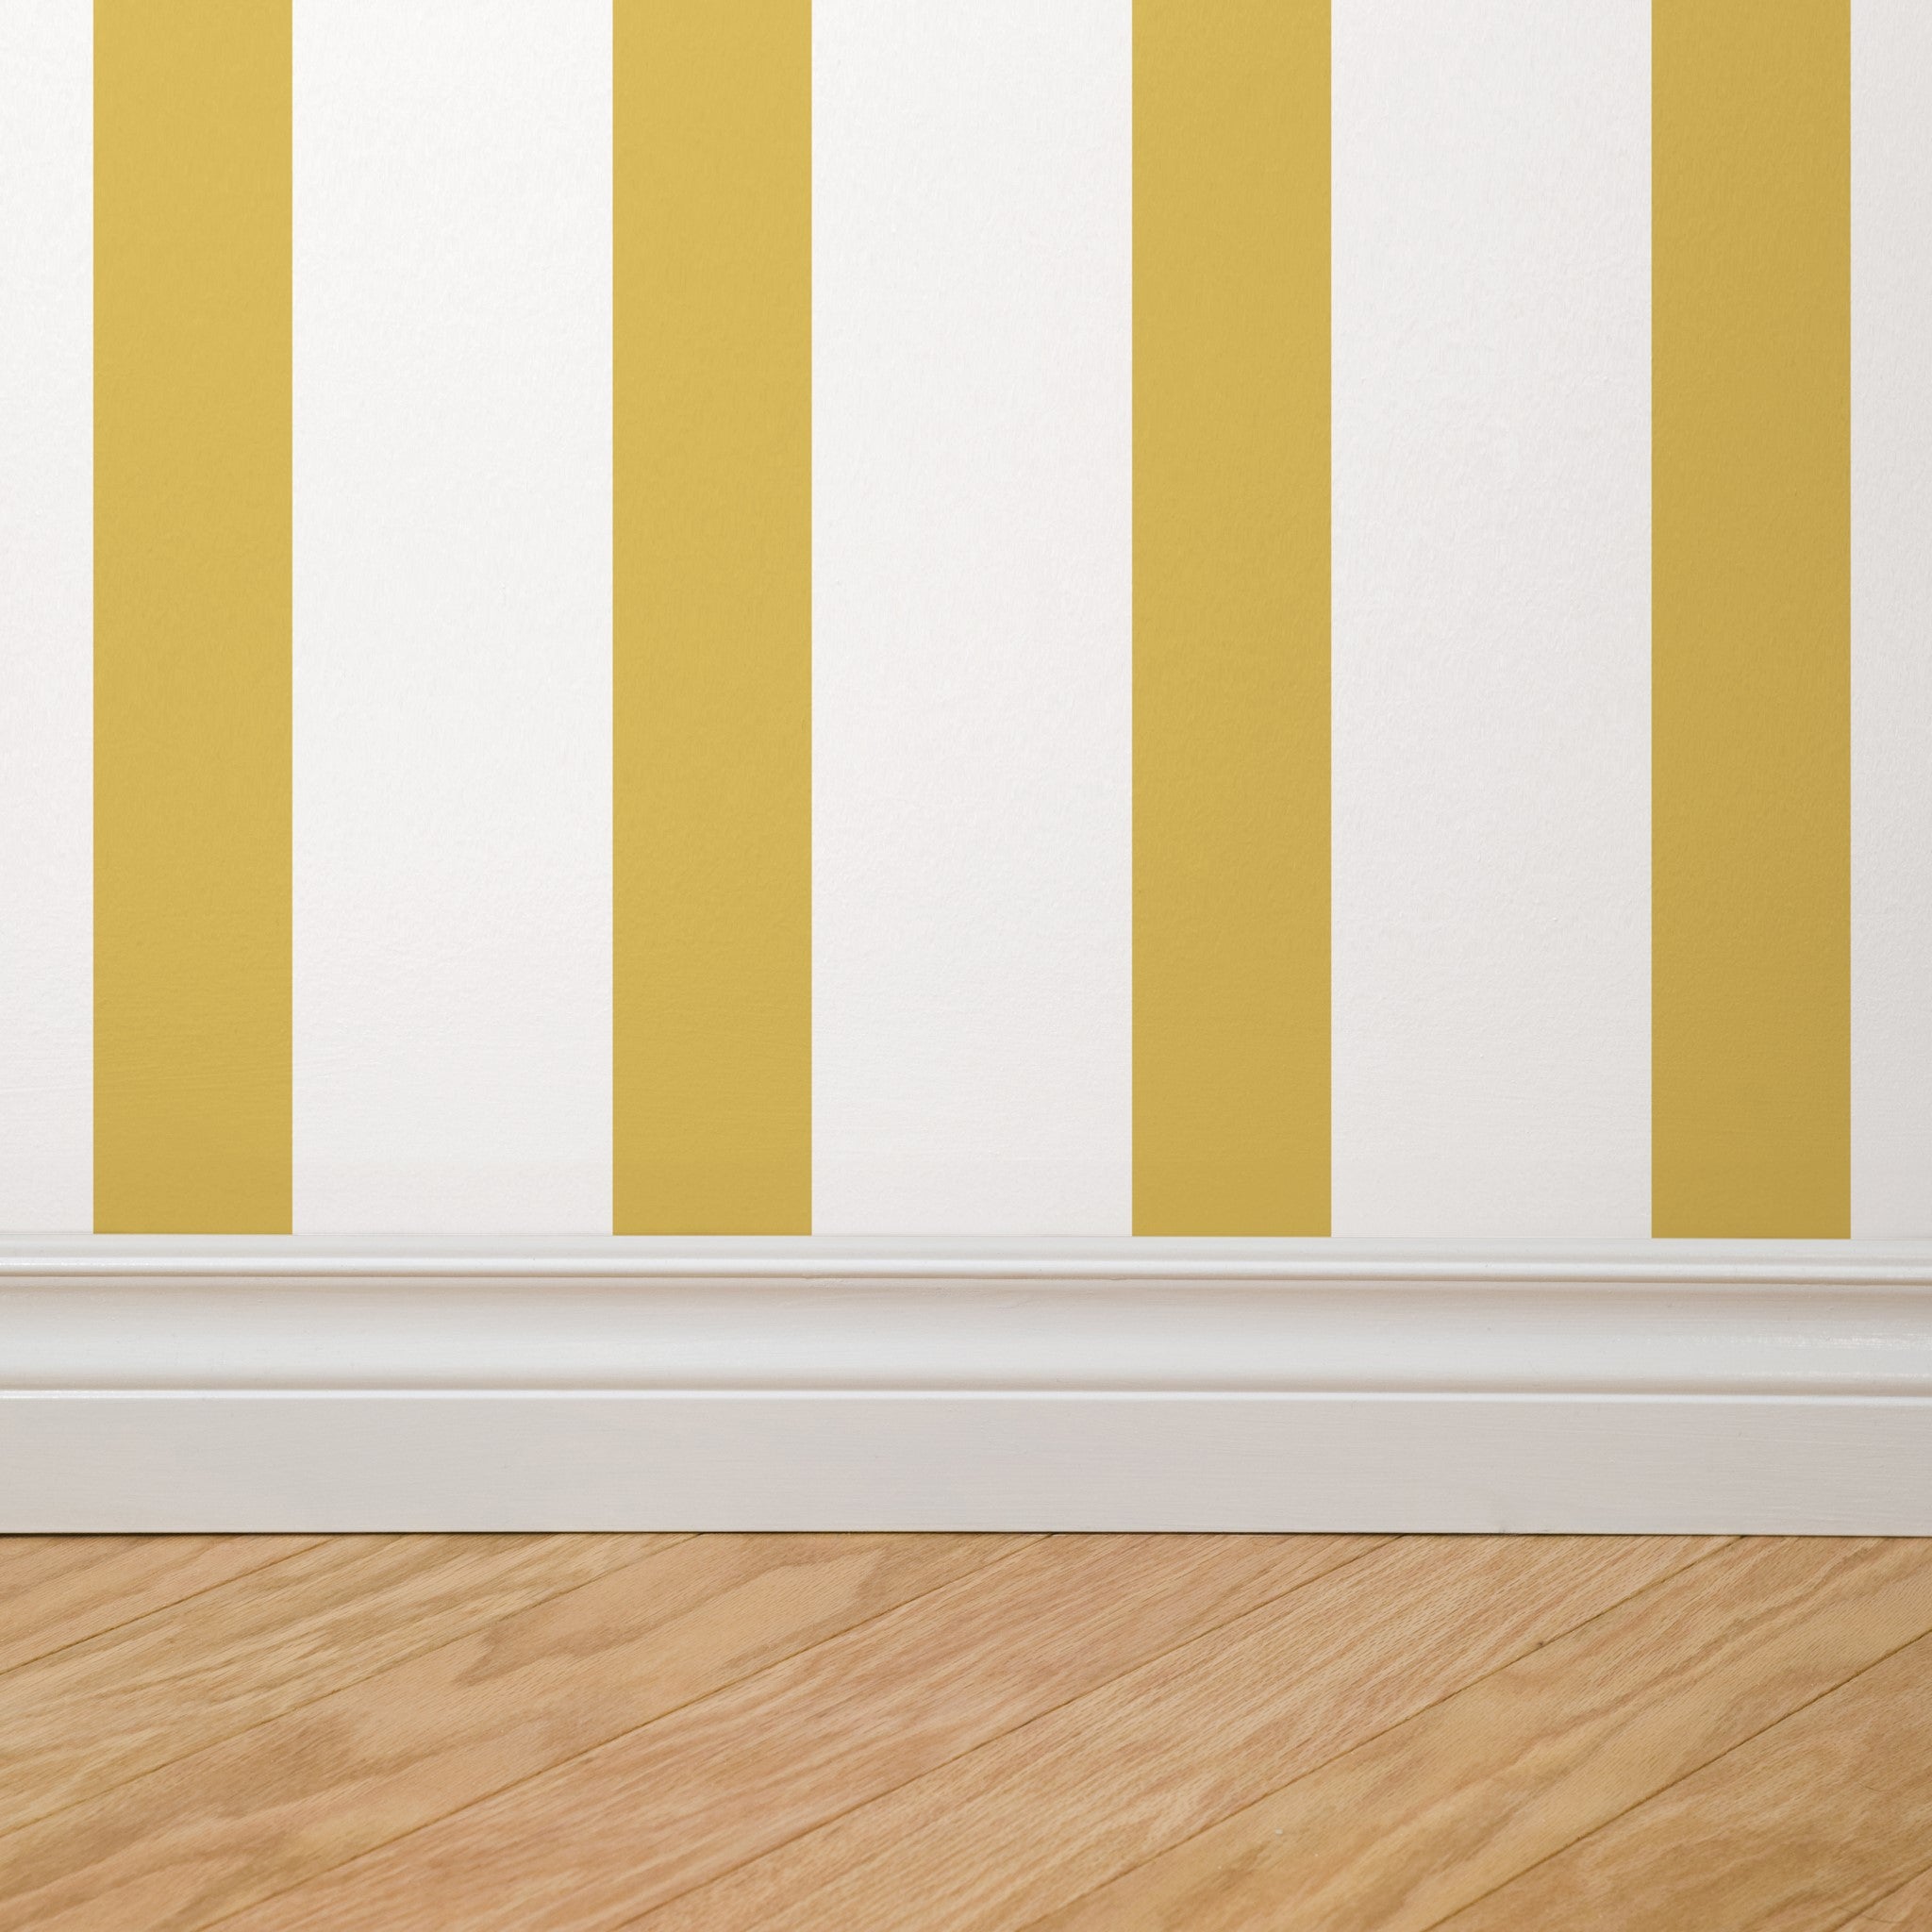 "Wall Blush's Alcott Wallpaper in a modern room with yellow and white stripes creating a chic focal point."